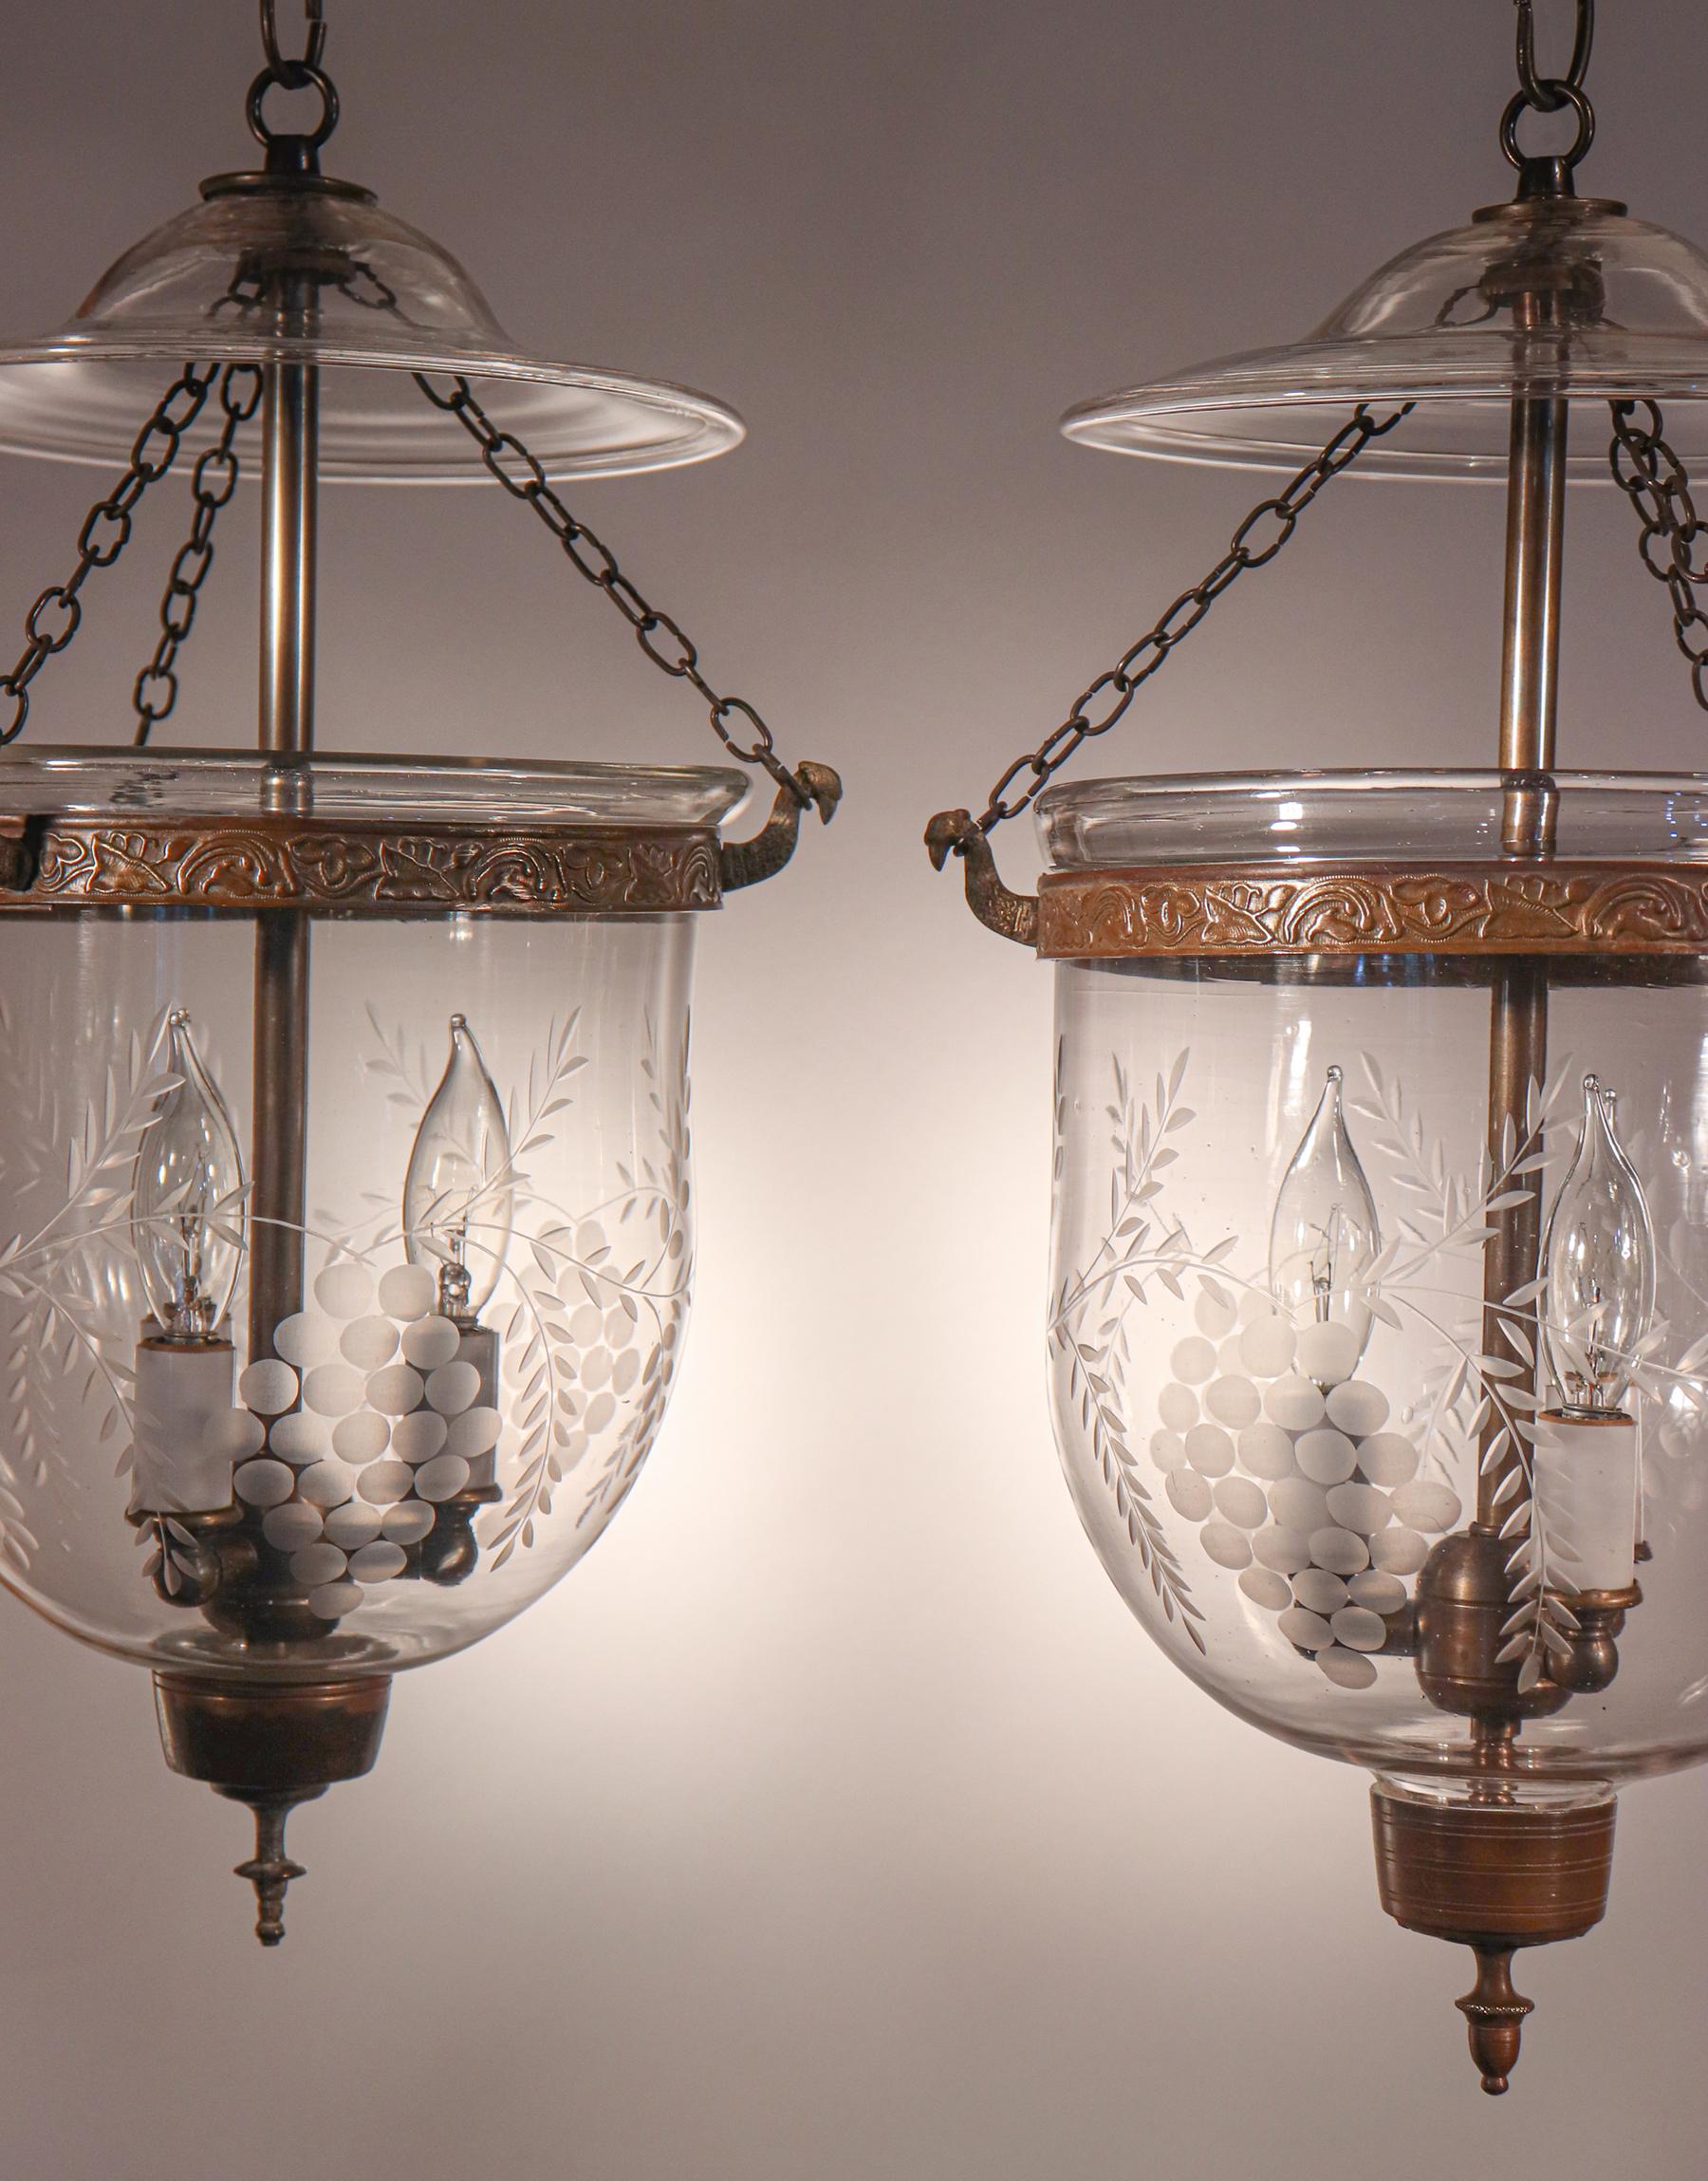 Embossed Set of Antique Petite Bell Jar Lanterns with Grape Etching